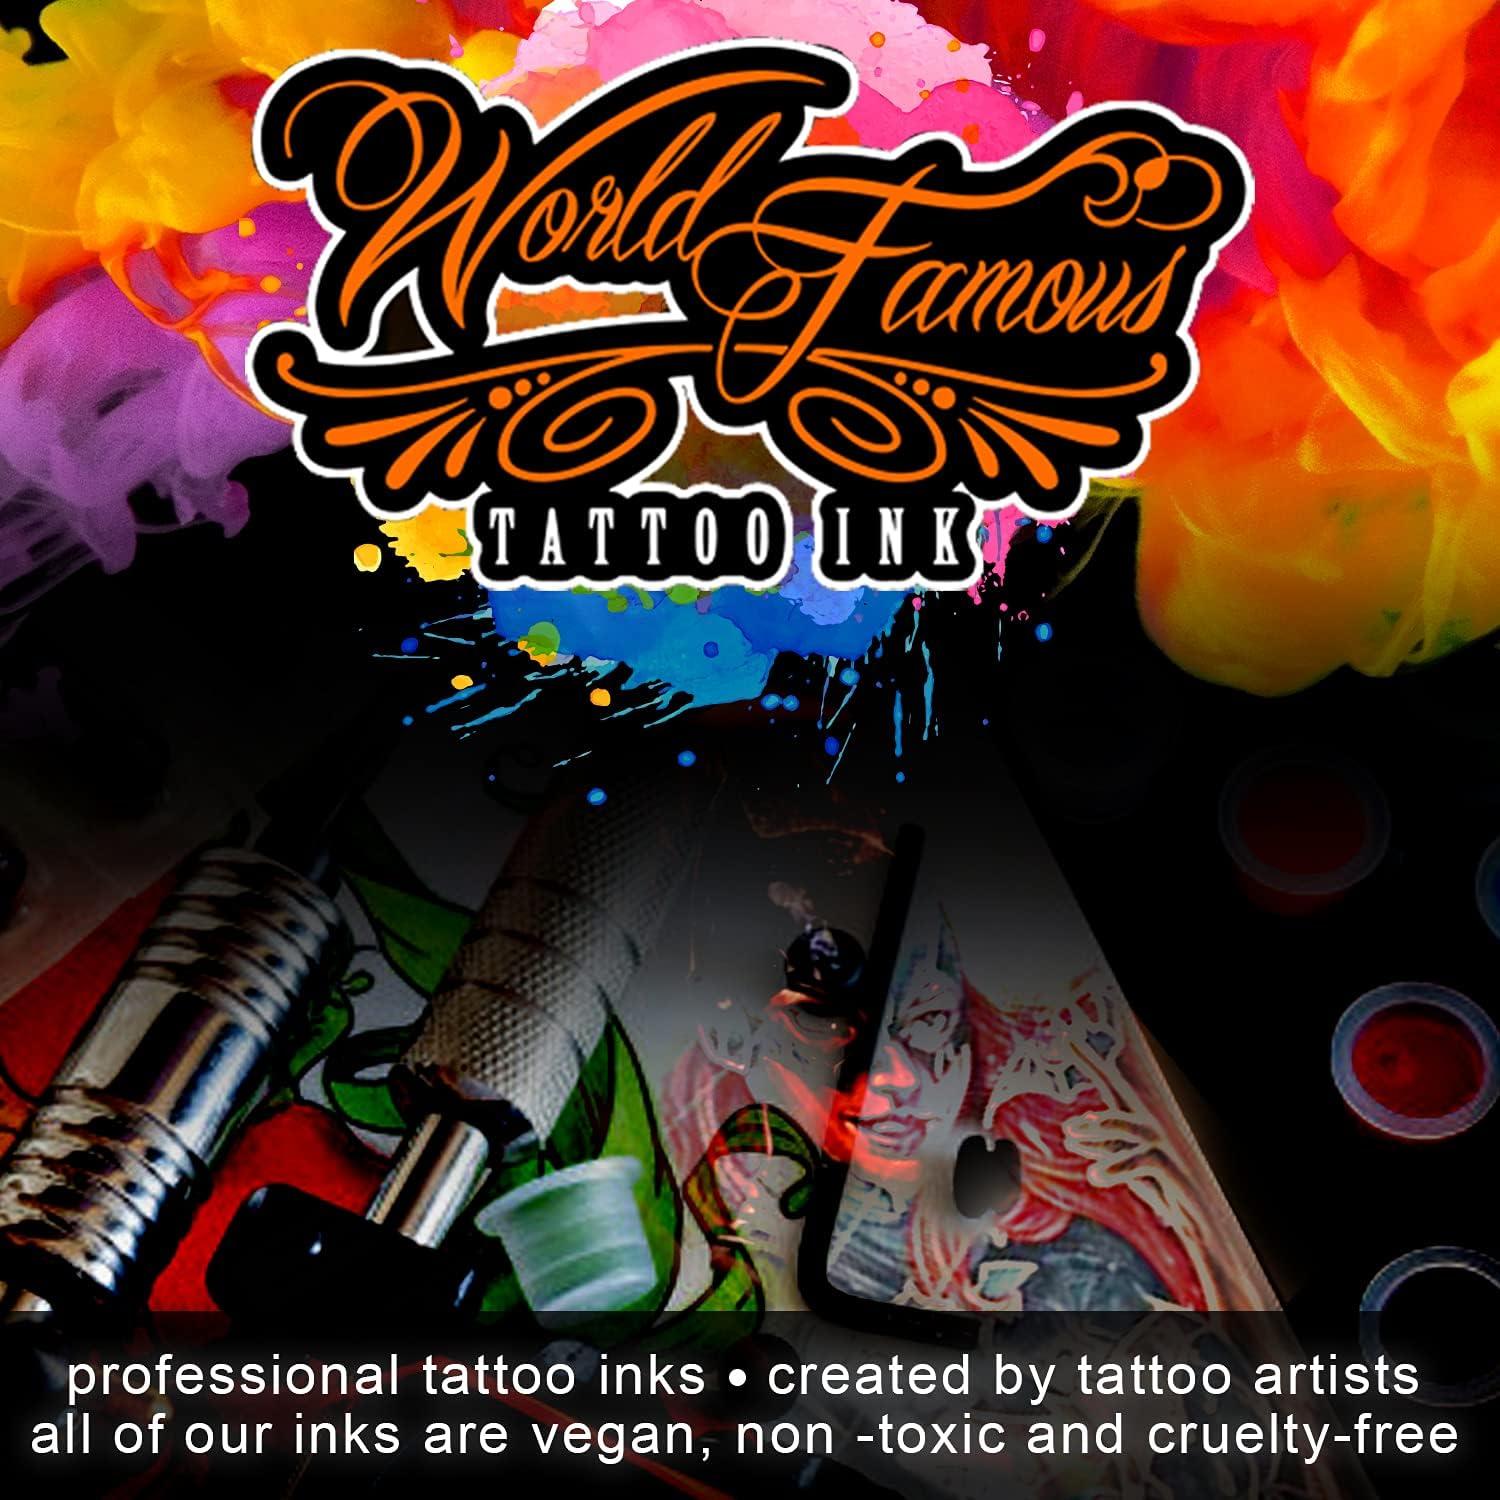  World Famous Red Tattoo Ink, Vegan and Professional